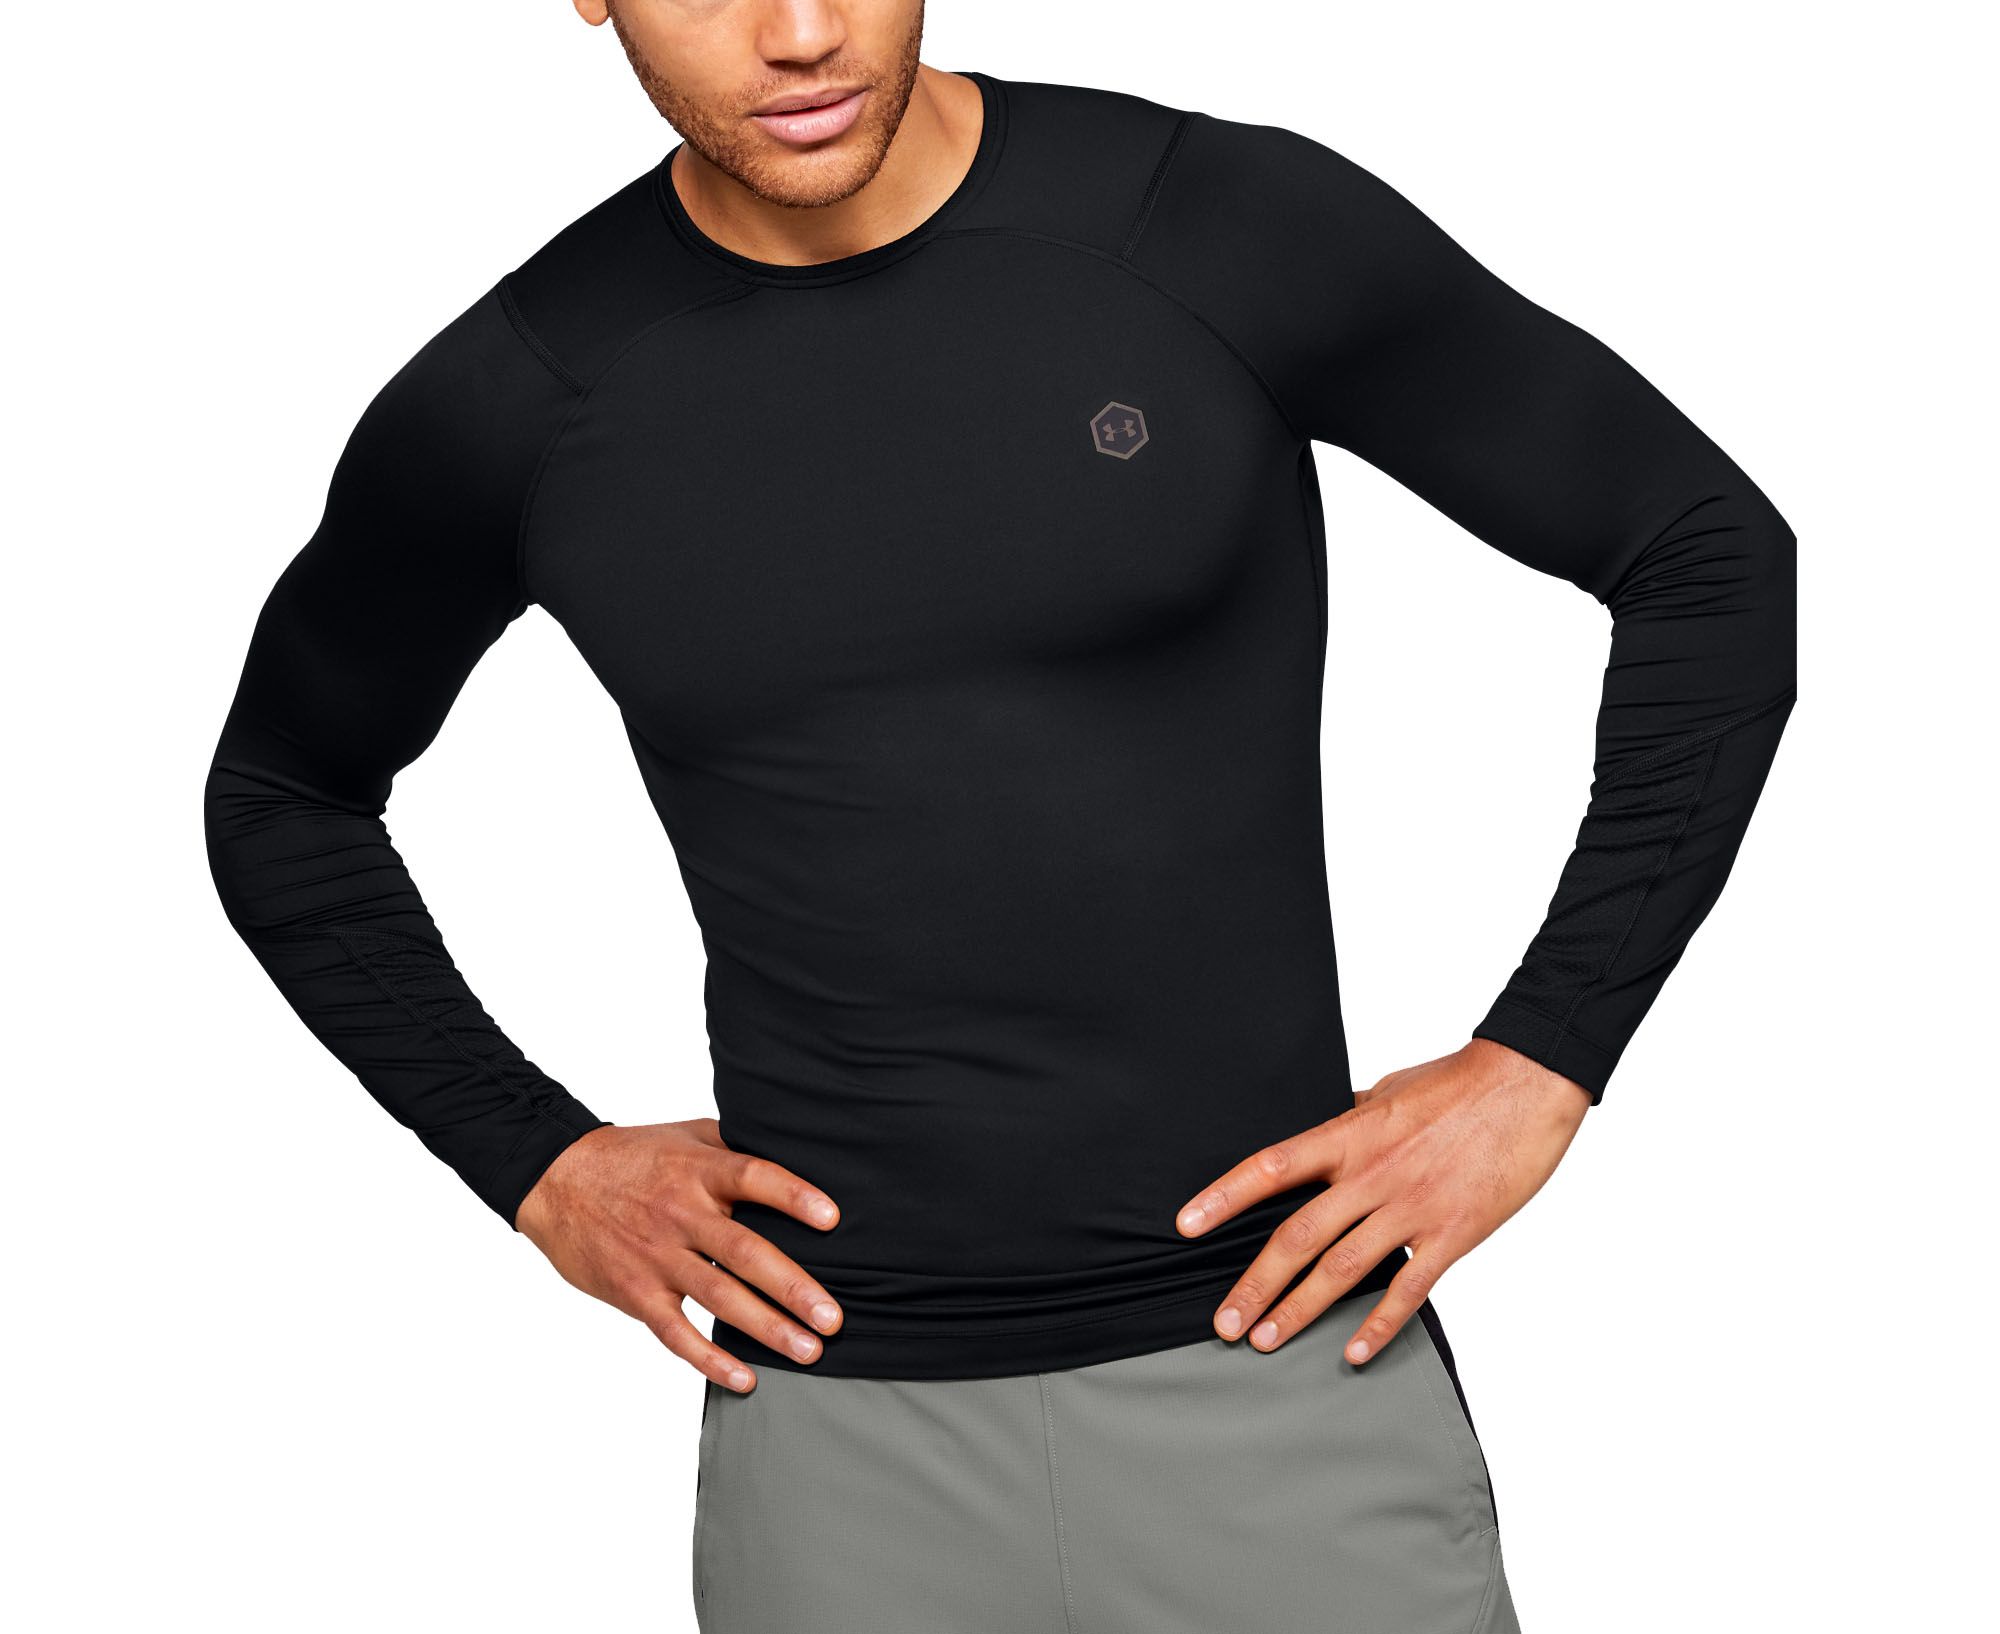 under armour long sleeve compression shirt